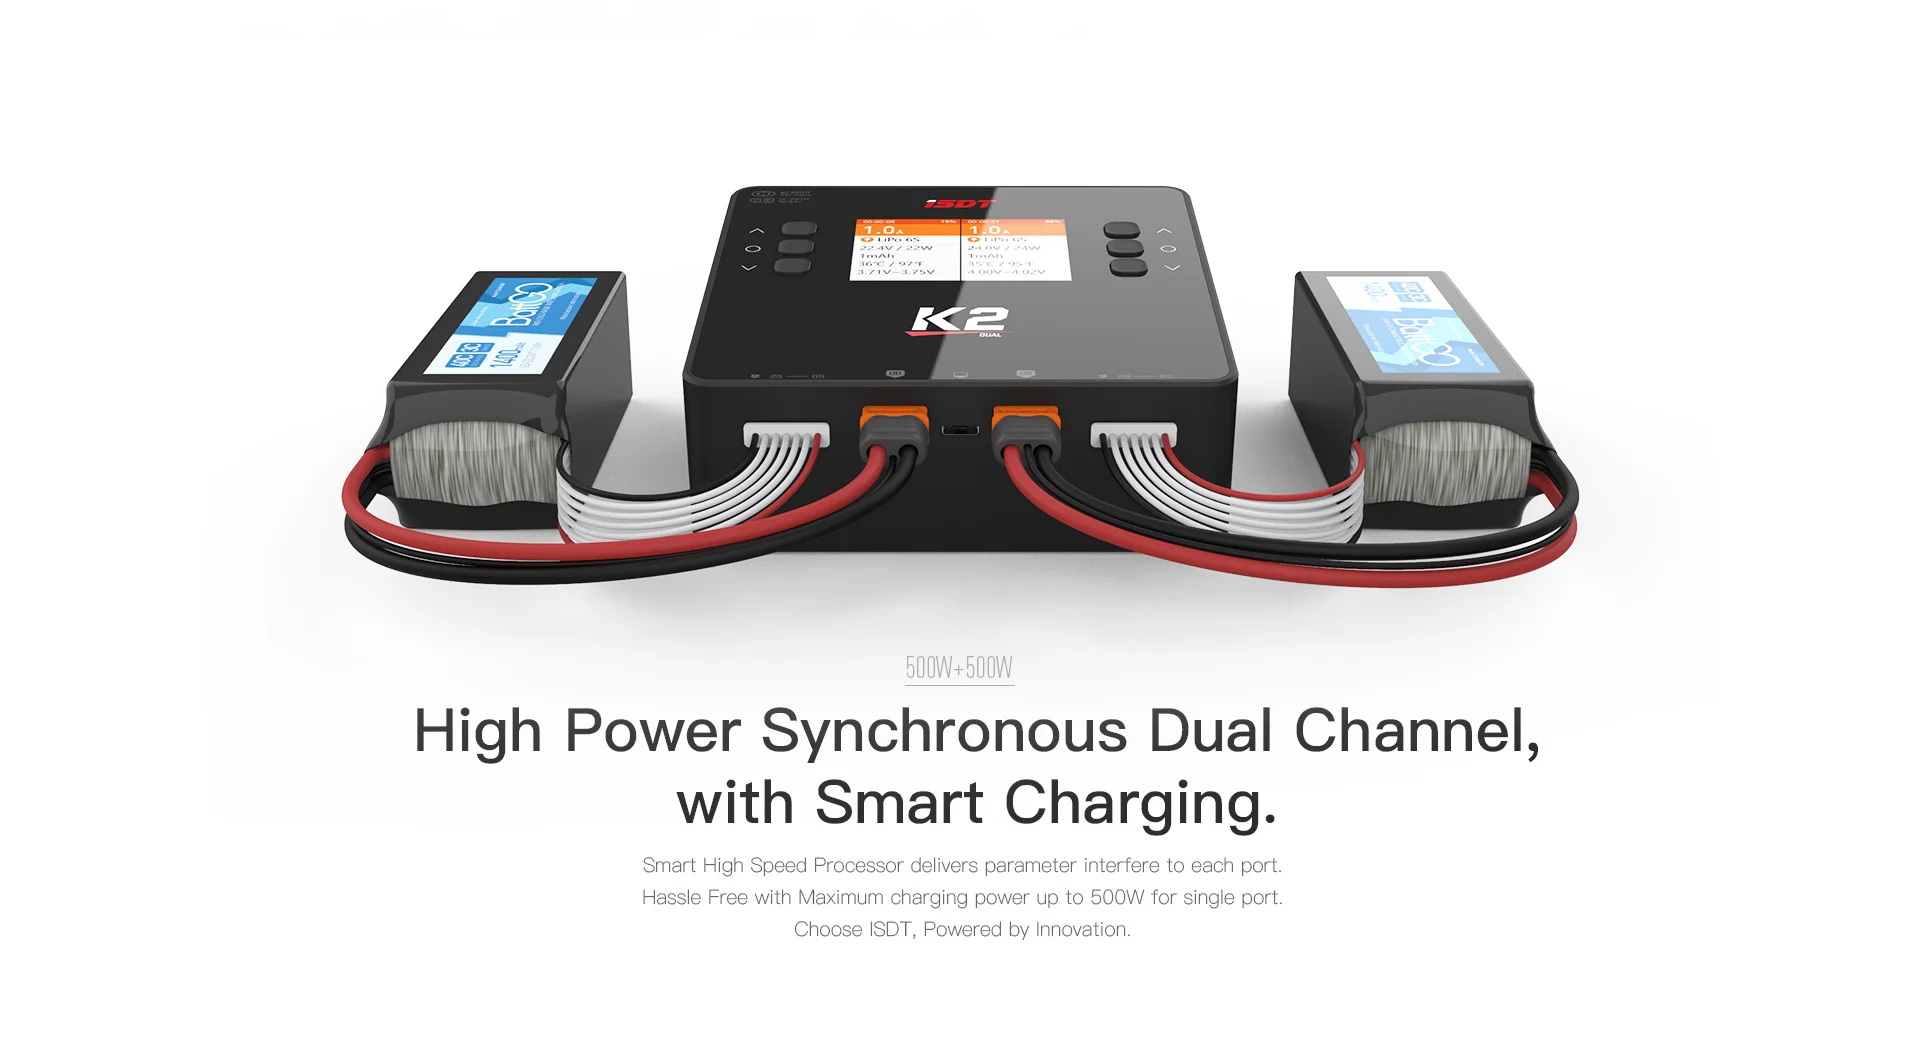 ISDT K2 AC/DC Dual Channel Smart Charger